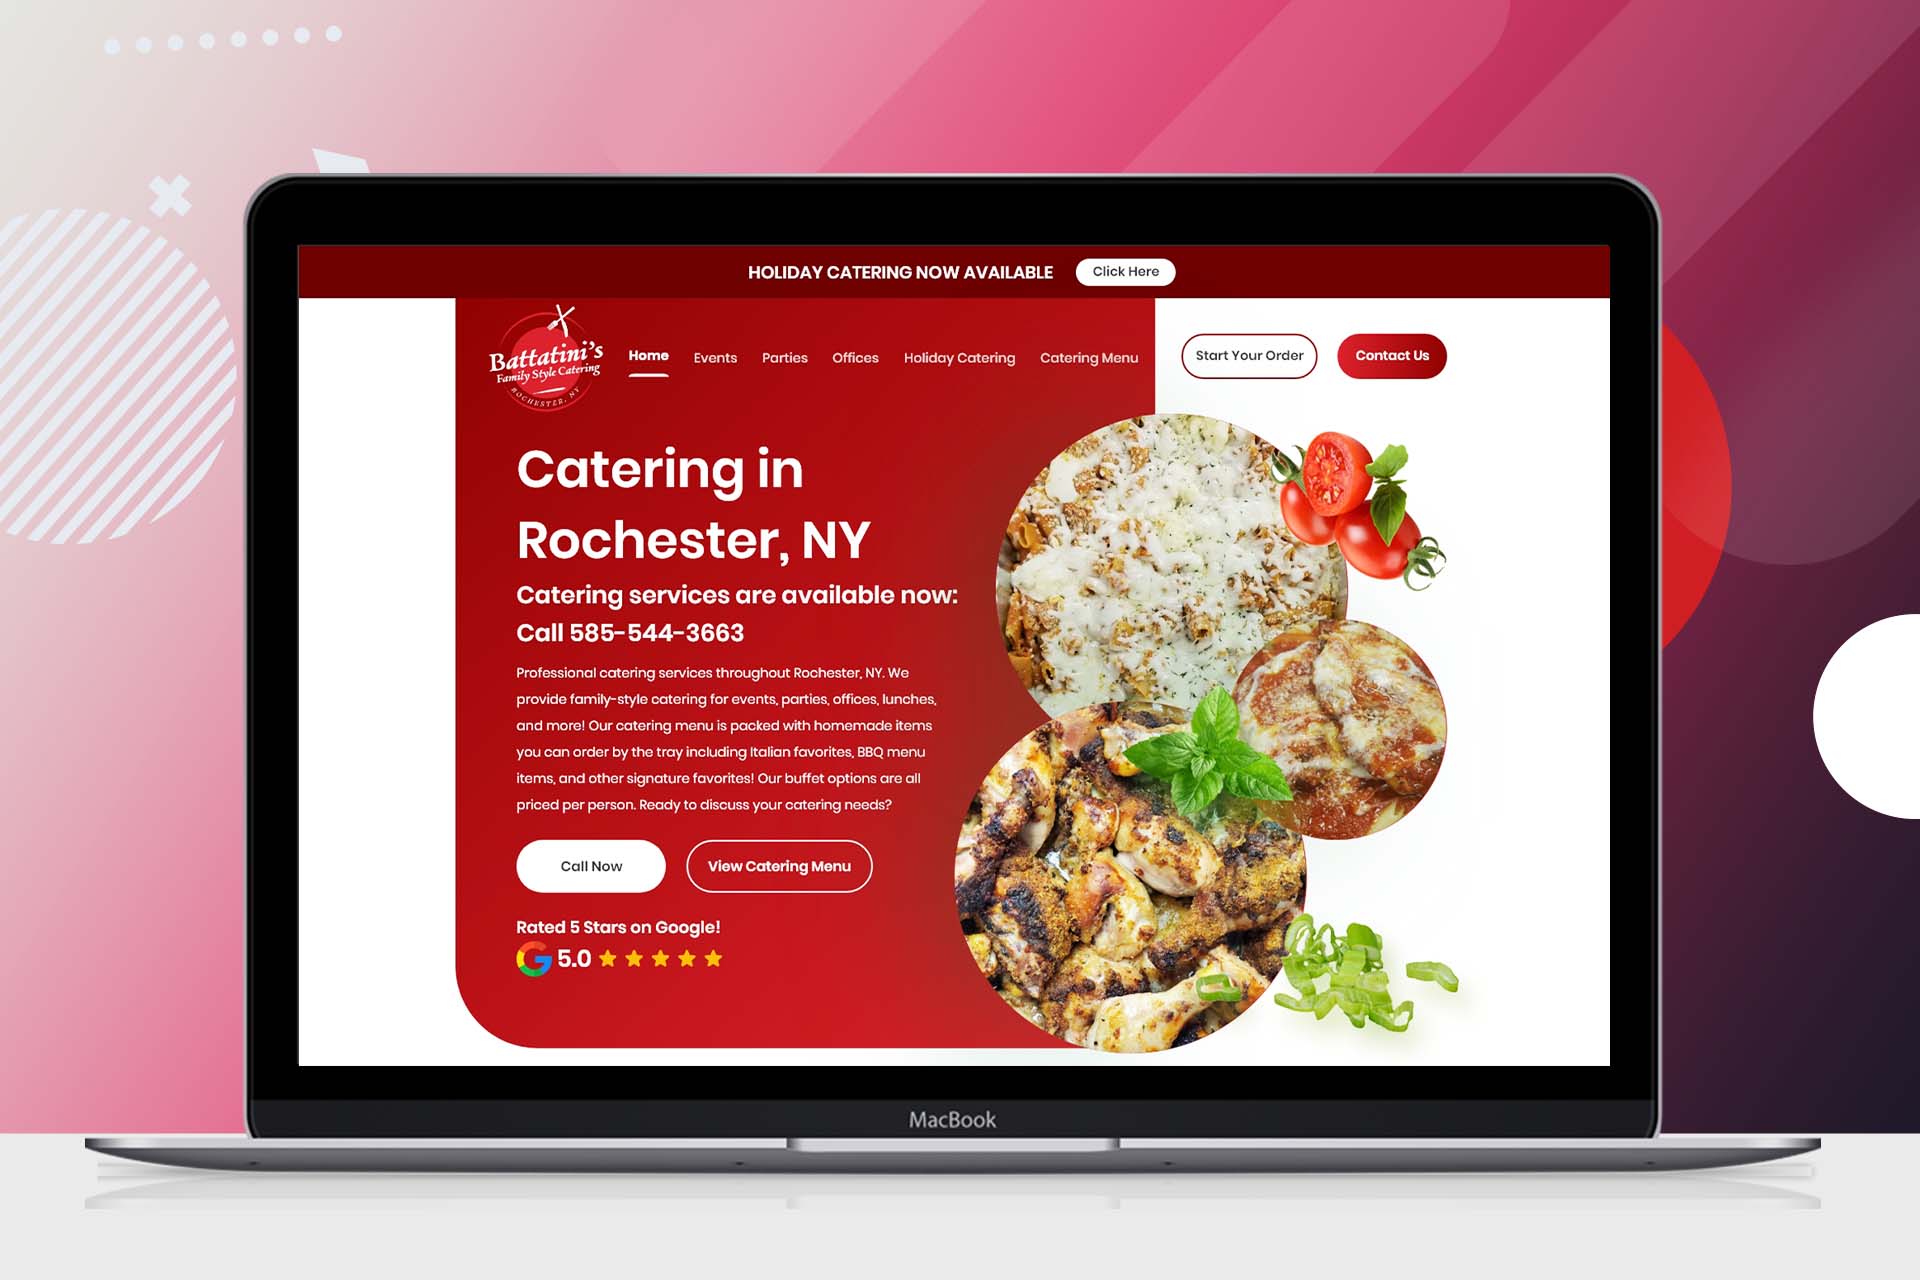 Holiday Catering website